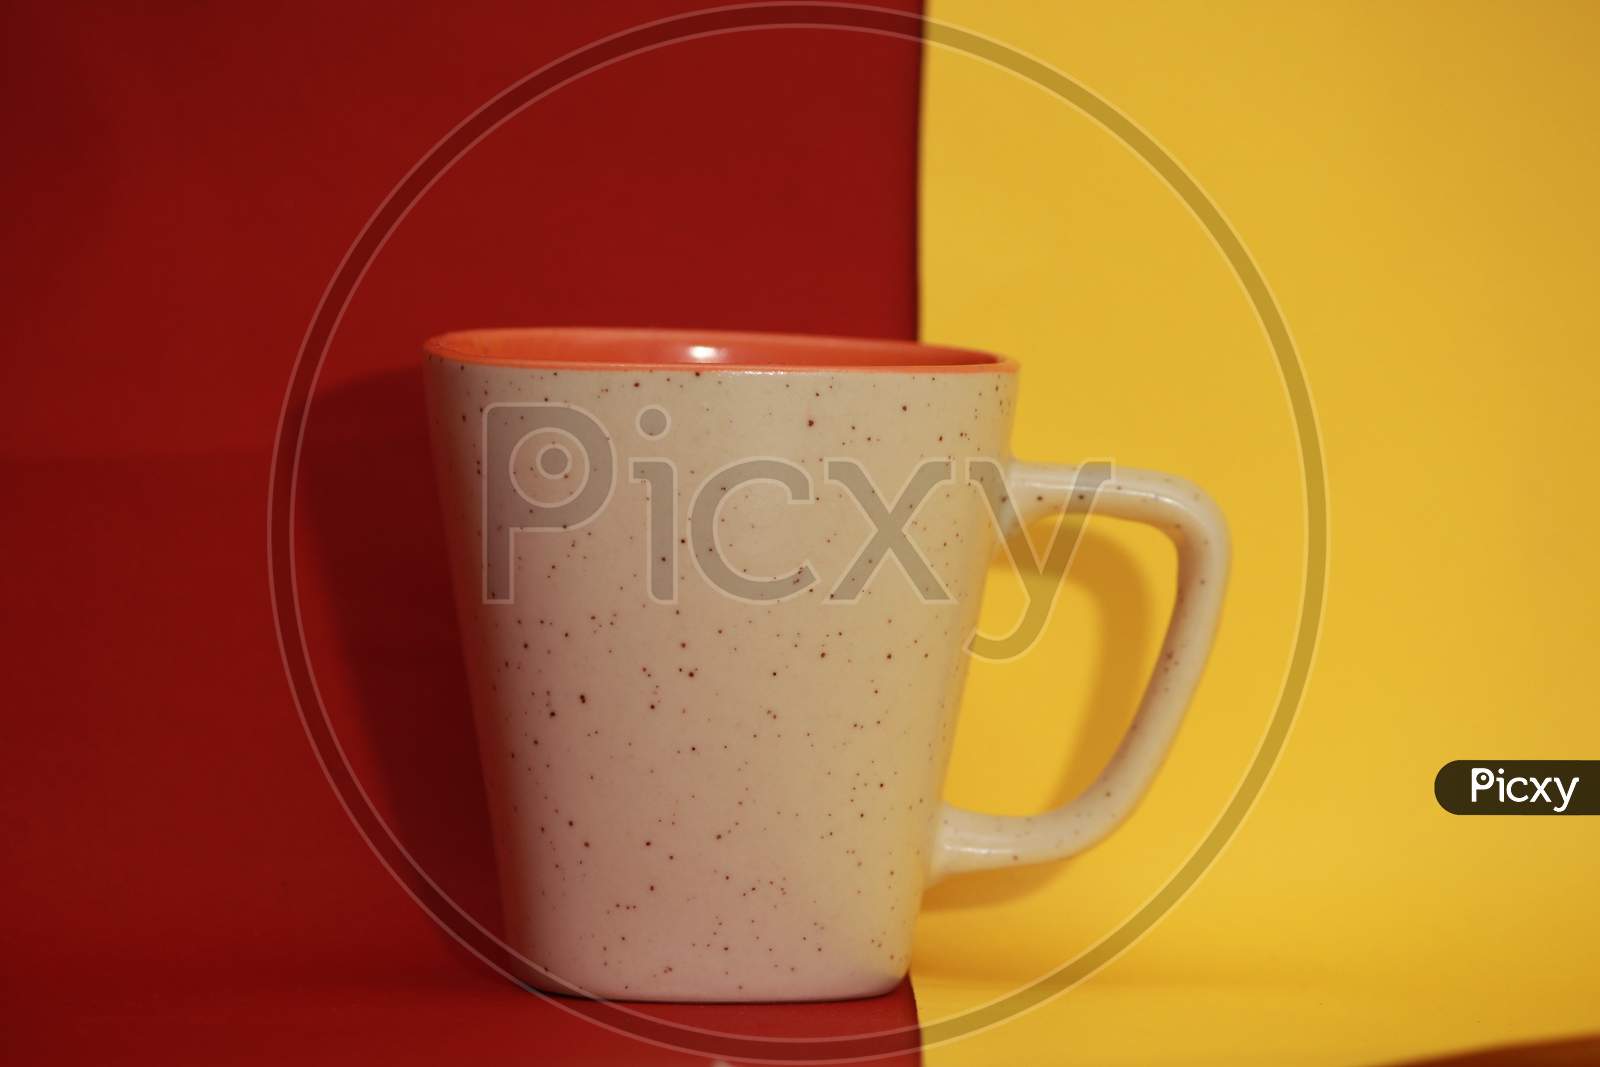 the tea mug wiith red and yellow background